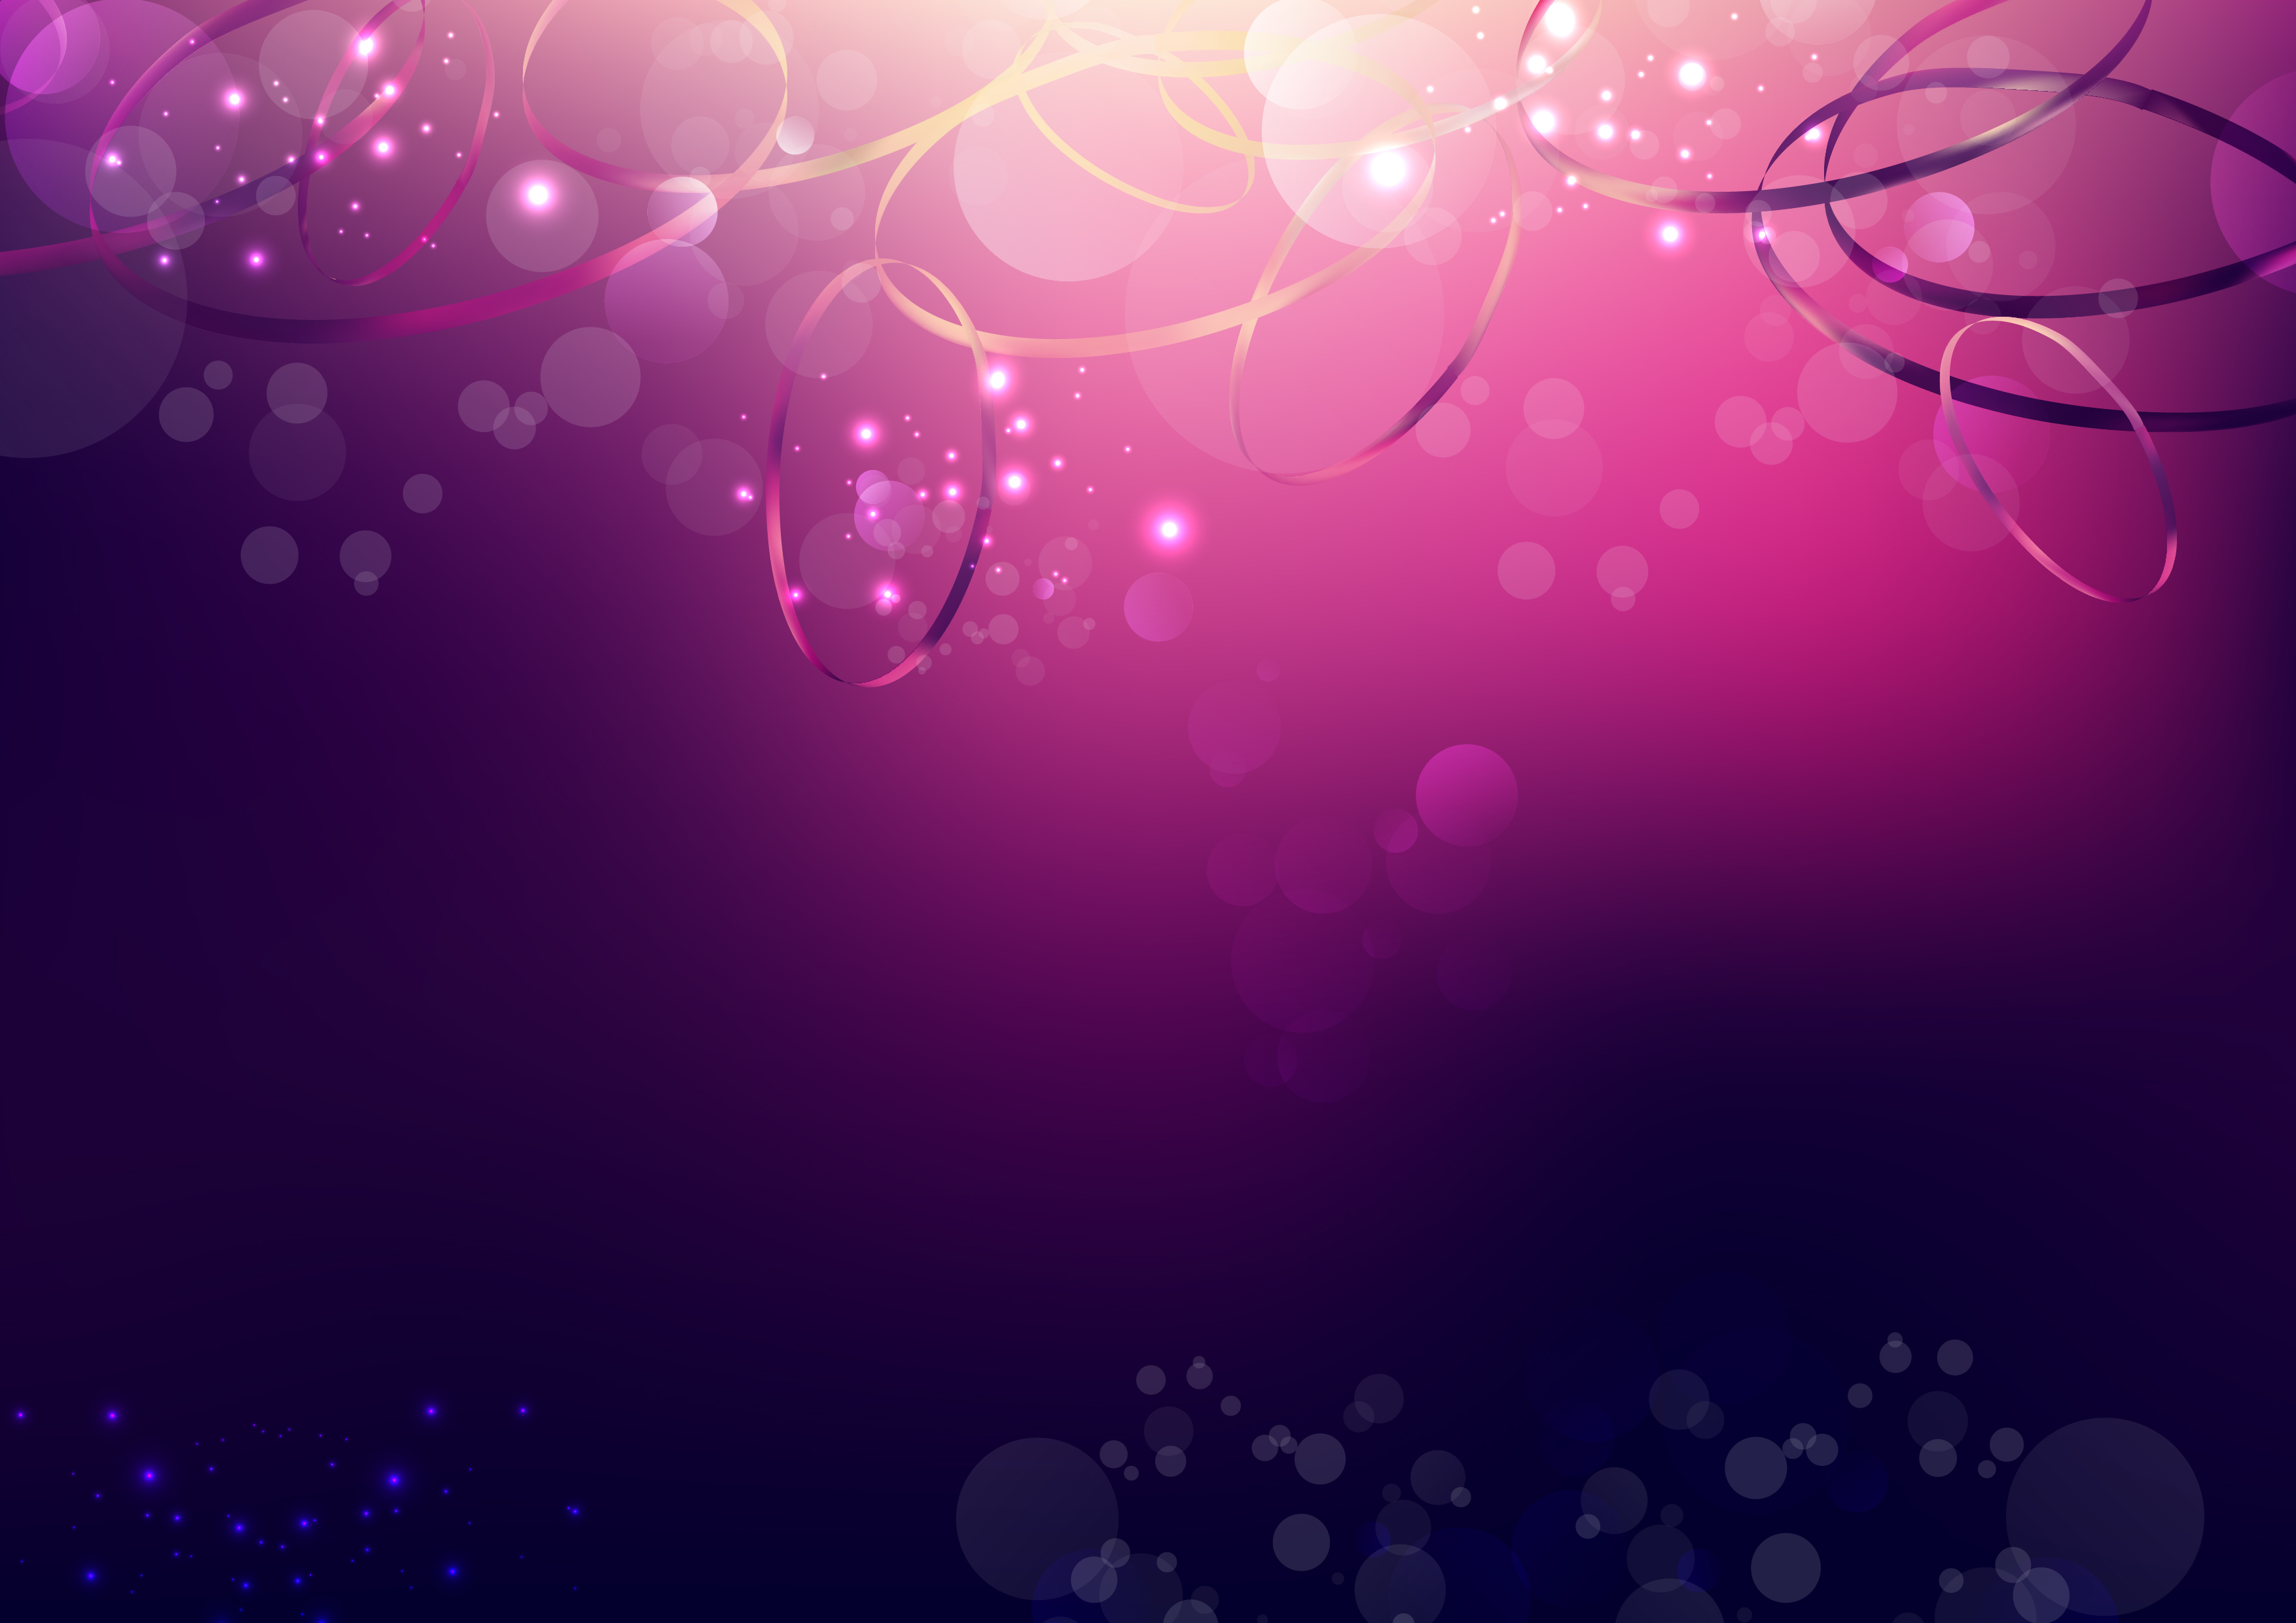 Free Abstract Purple and Black Graphic Background